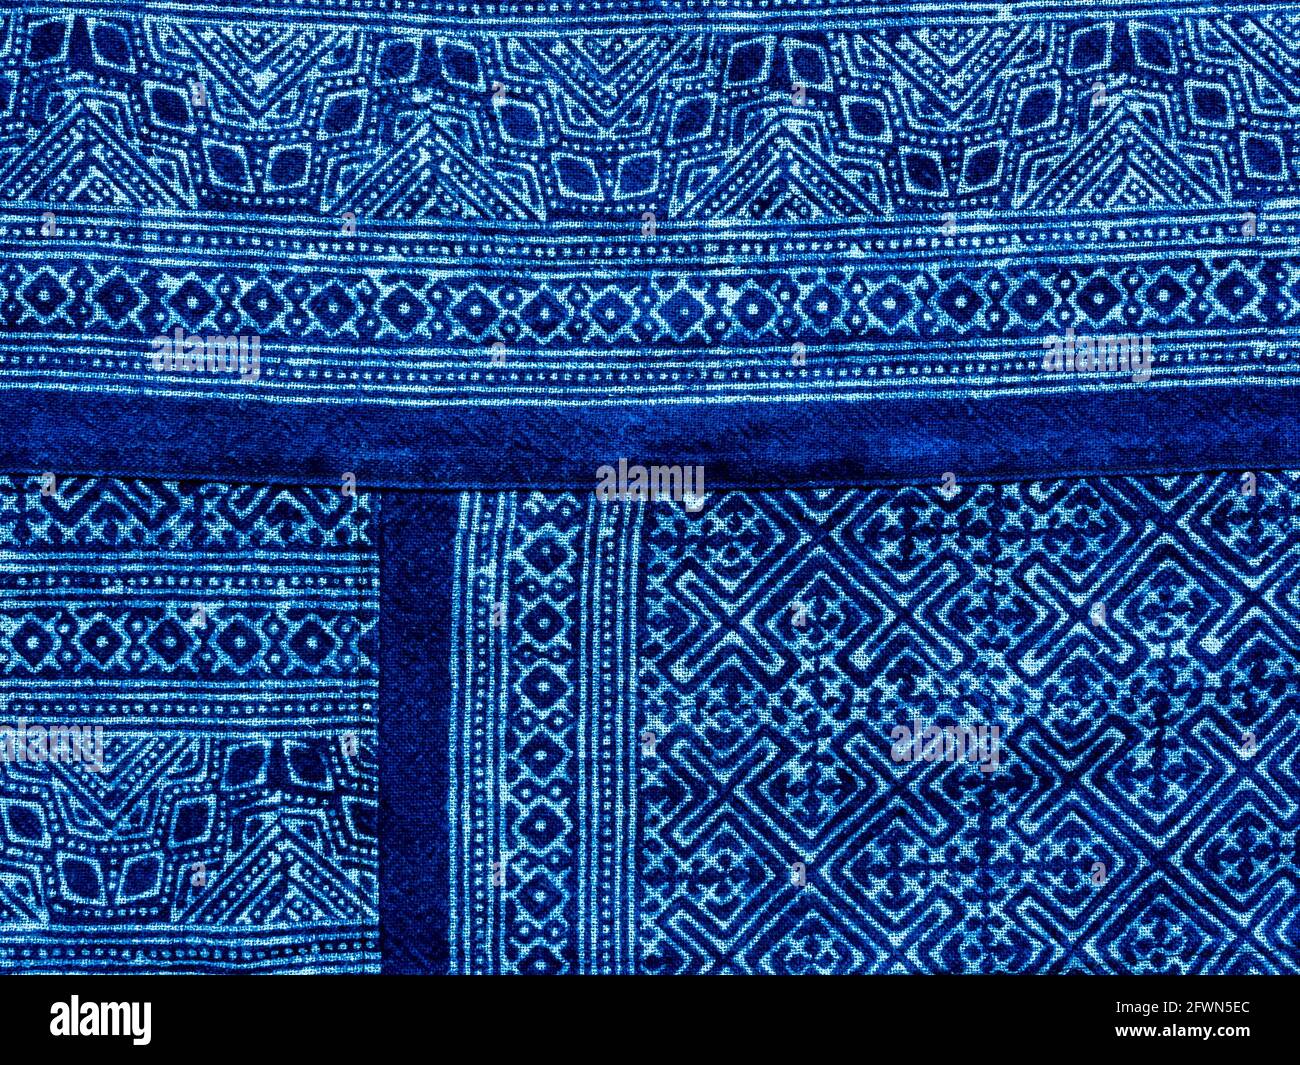 The Fabric Is Indigo Dye Use As Background,Local Fabric Stock